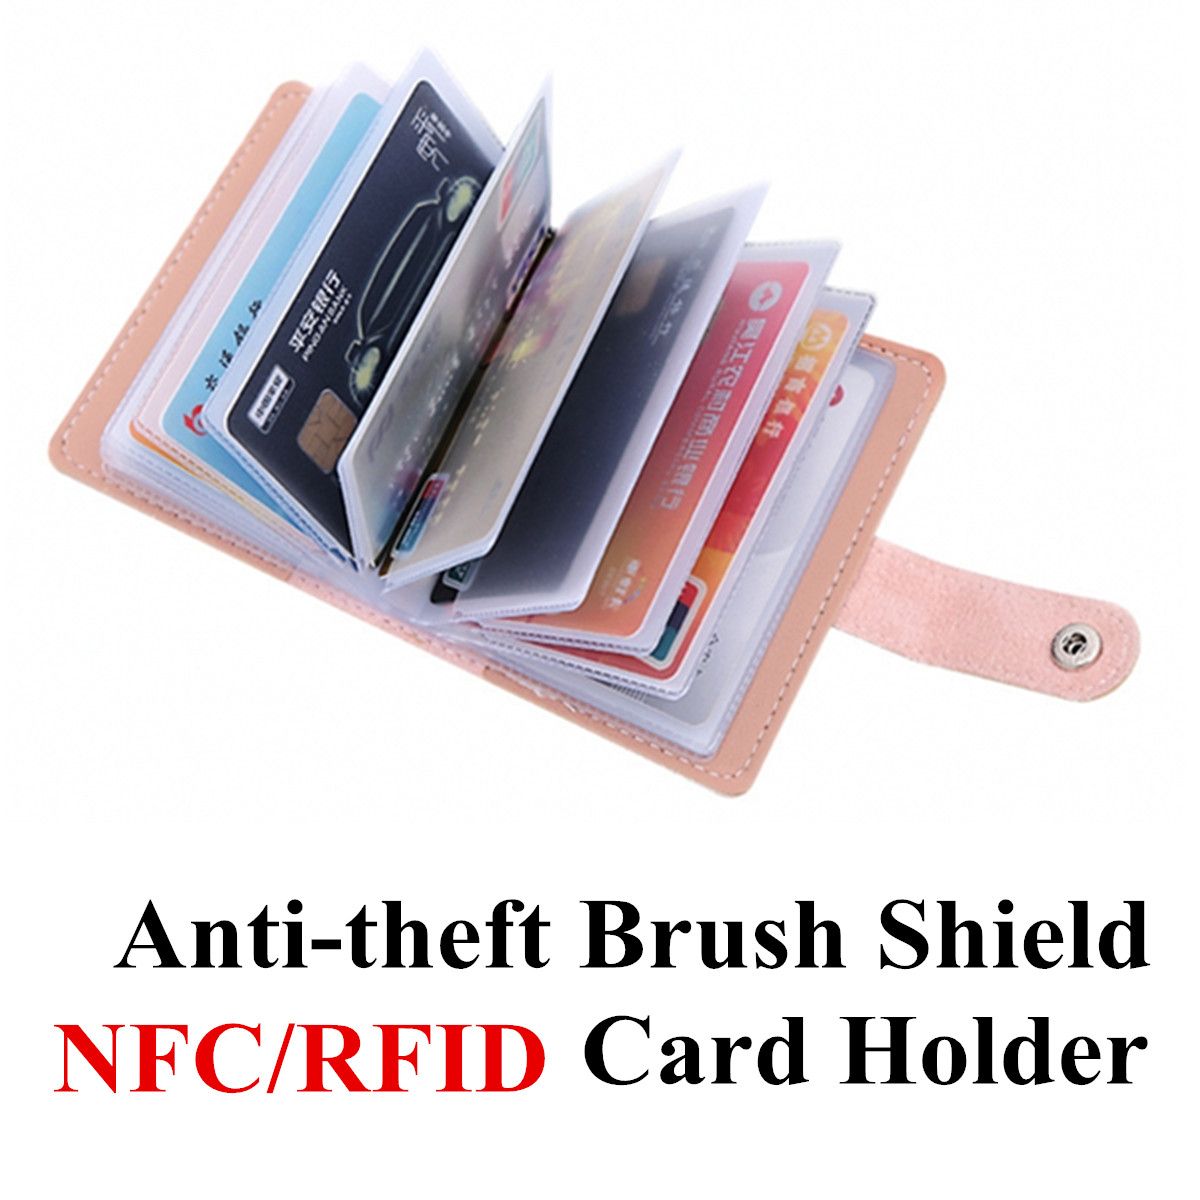 26-Card-Slots-Portable-Leather-Wallet-Anti-theft-Brush-Shield-NFCRFID-Card-Holder-1644277